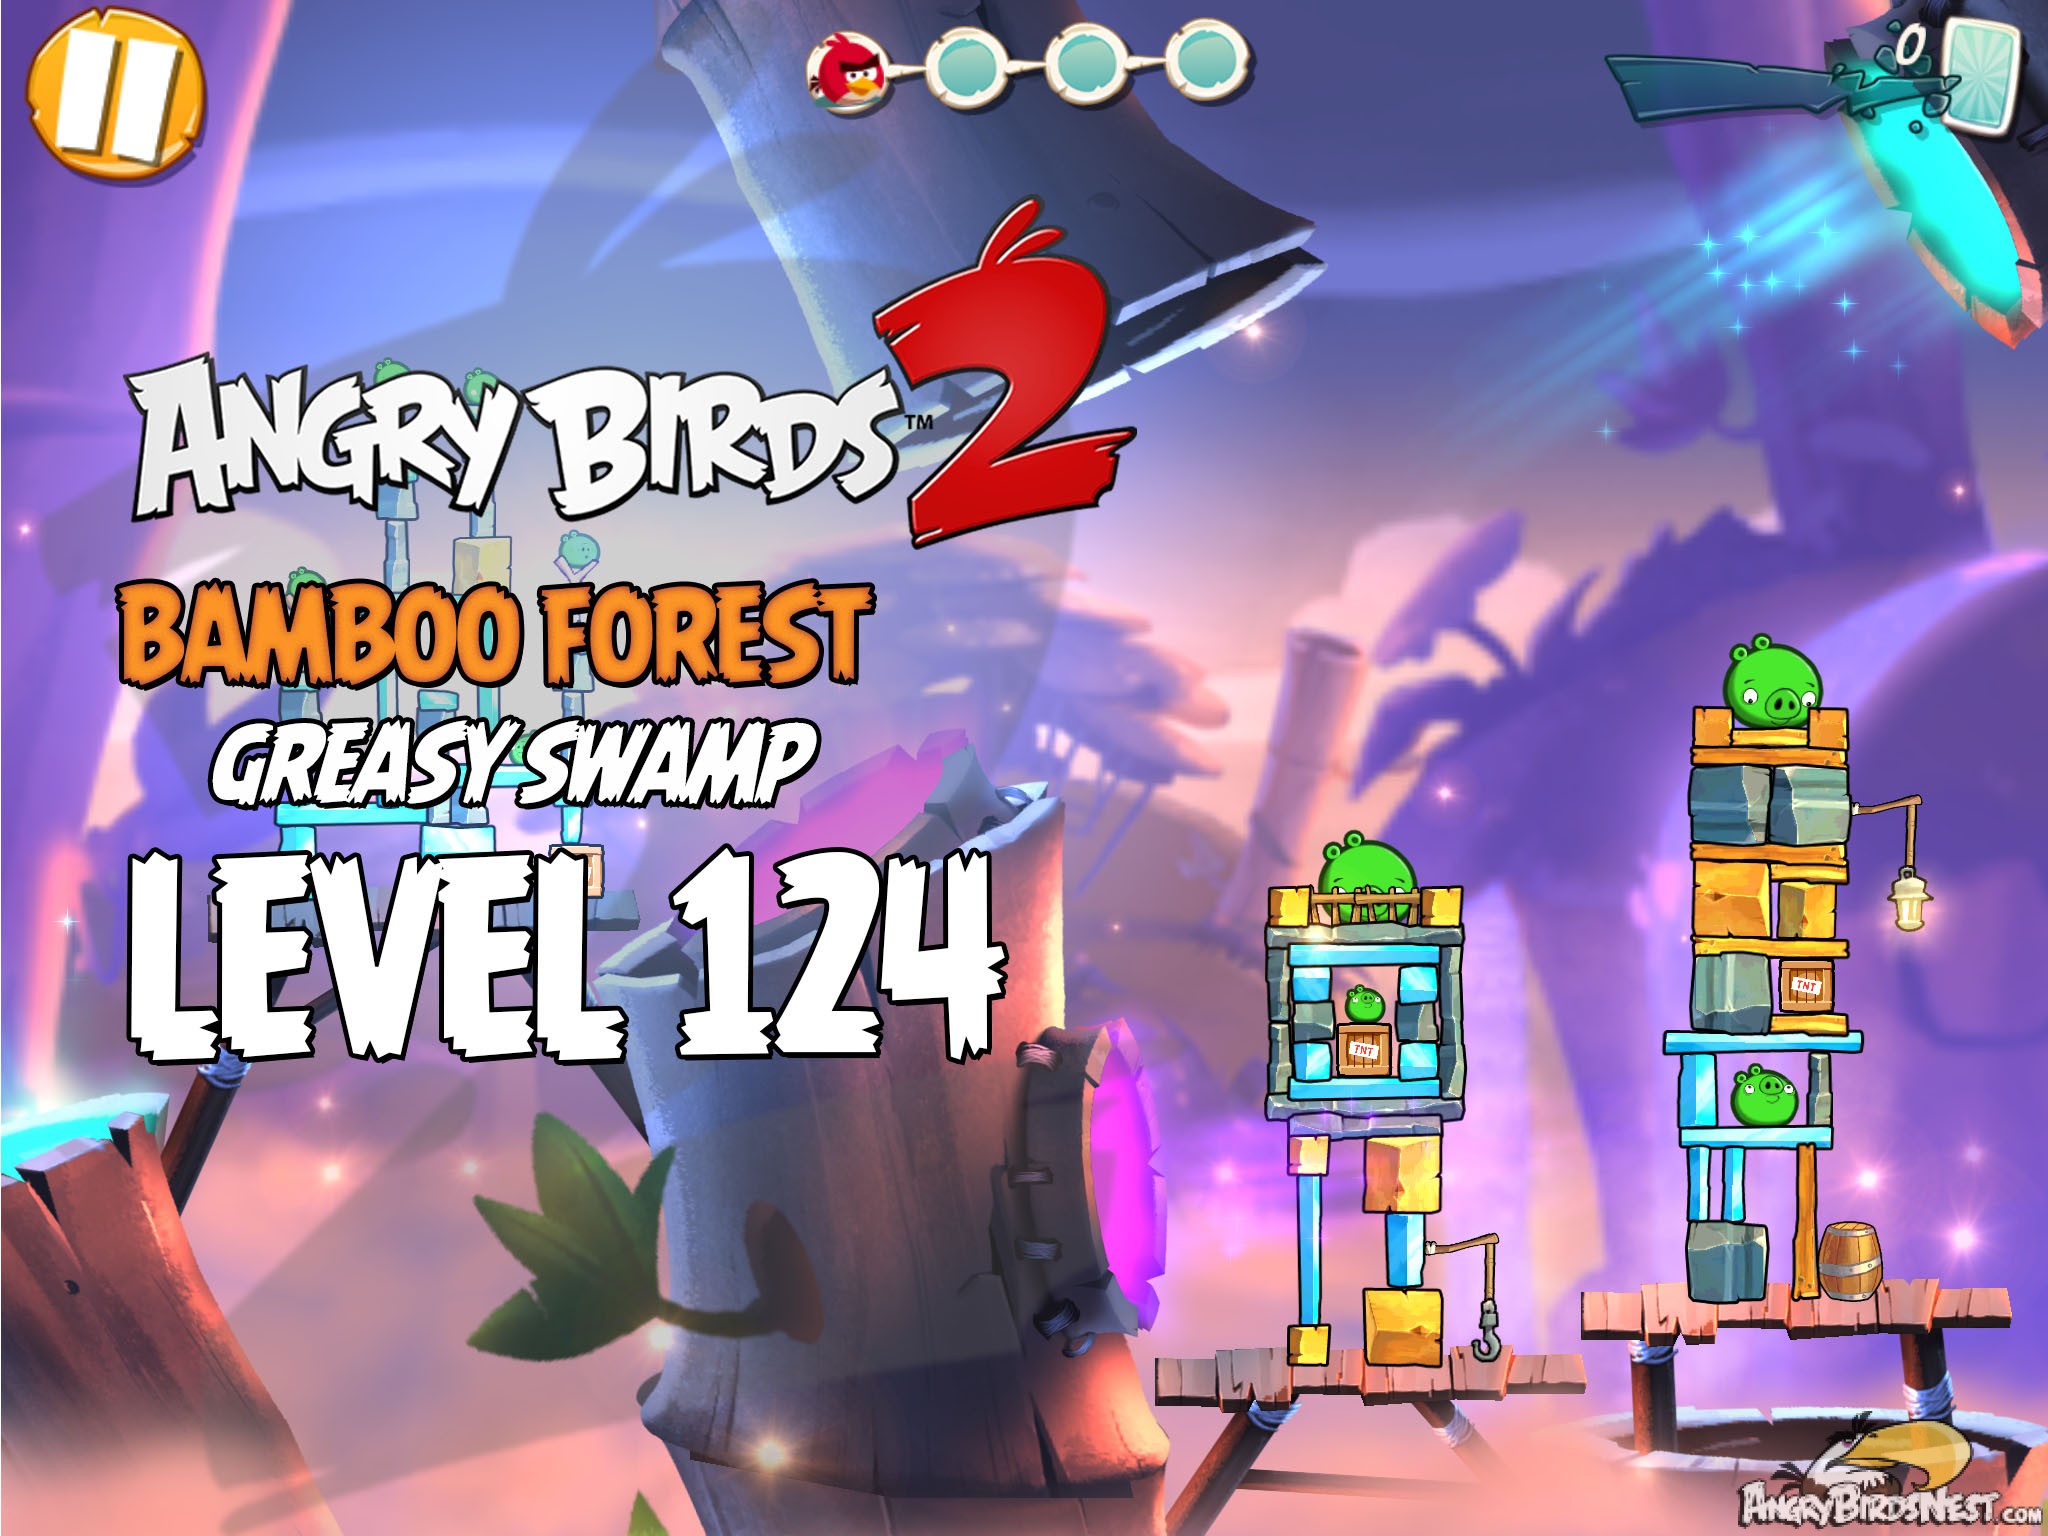 Angry Birds 2 Bamboo Forest Greasy Swamp Level 124